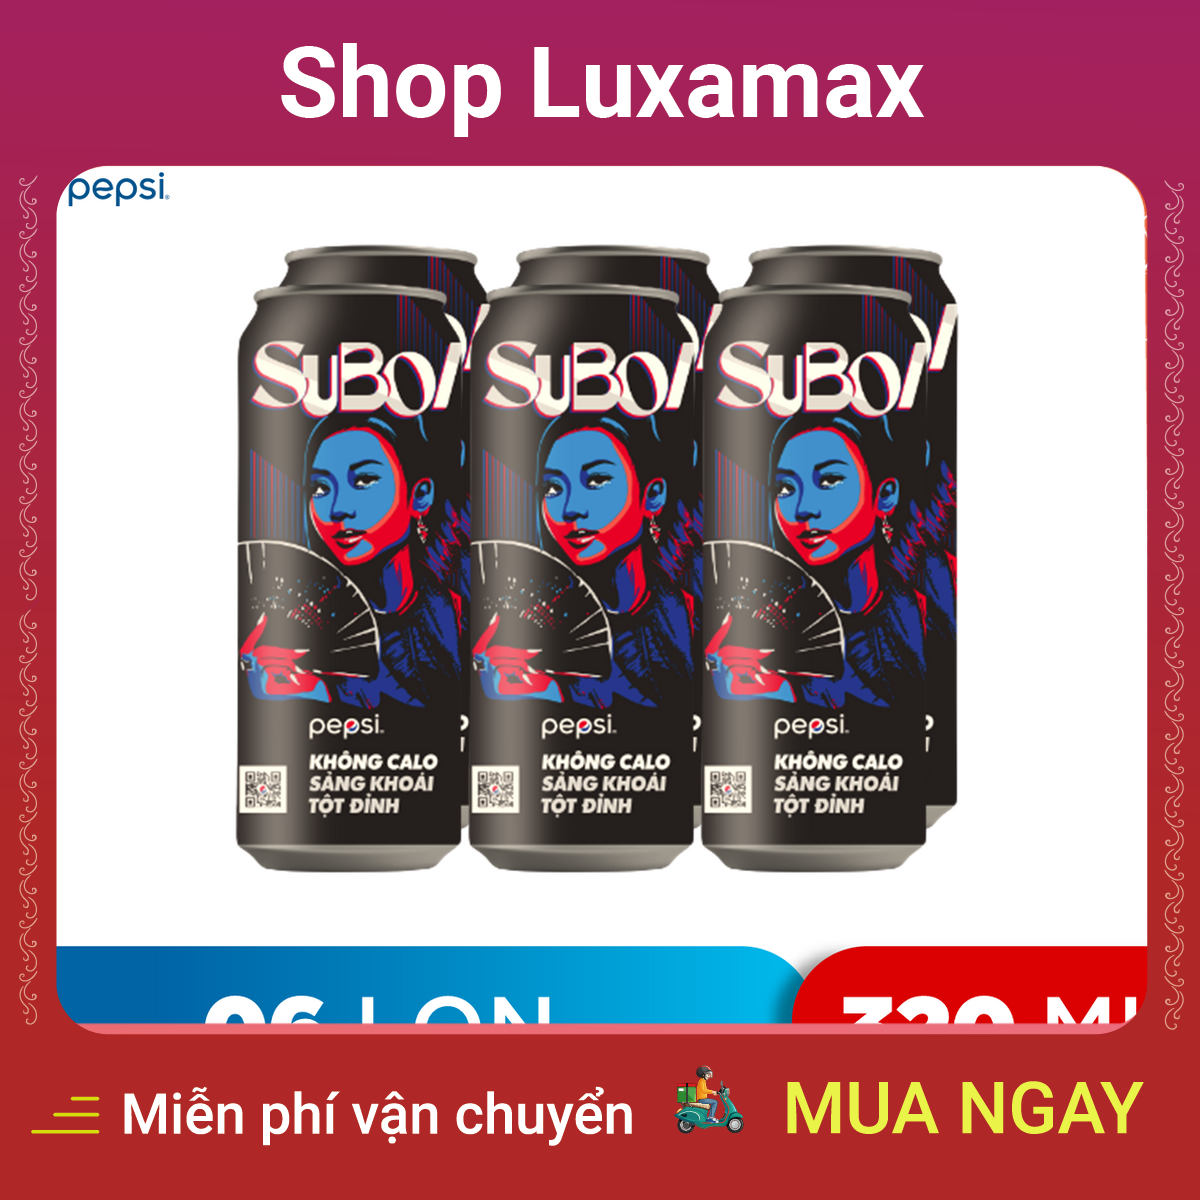 lốc 6 lon nước uống có gaz pepsi không calo (320ml lon) dtk93853755 - shop luxamax - 6 cans of drinking water with gaz pepsi without calories (320ml cans) 3